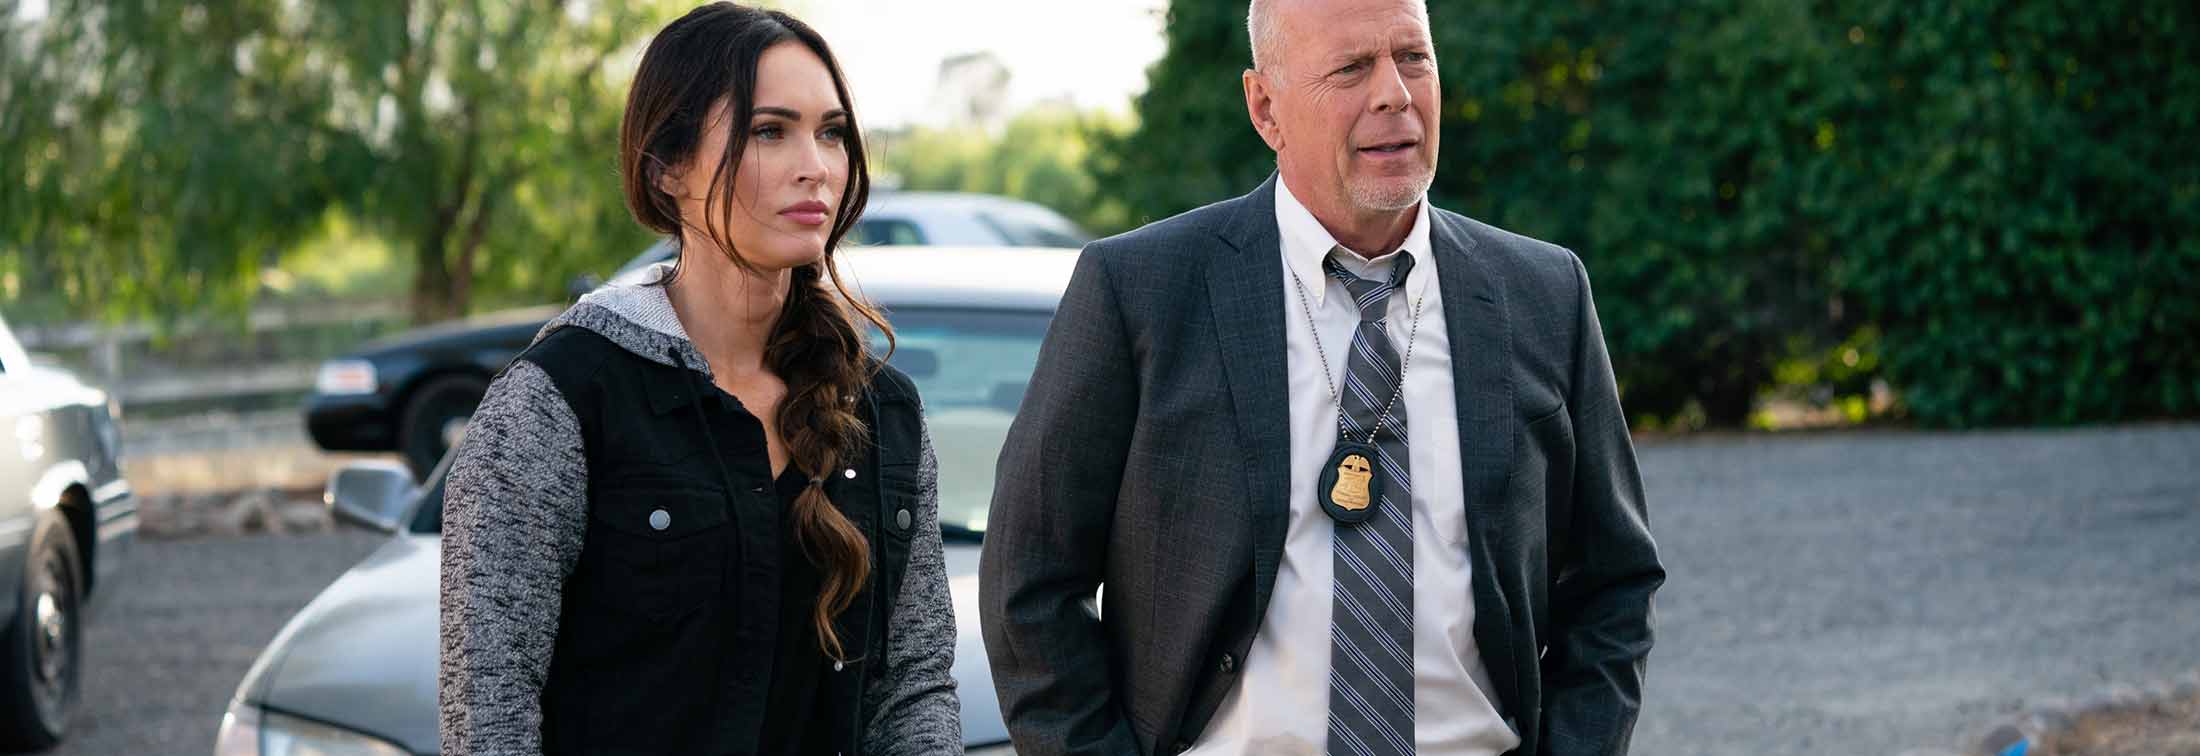 Midnight in the Switchgrass - Bruce Willis and Megan Fox's gritty and intense crime thriller